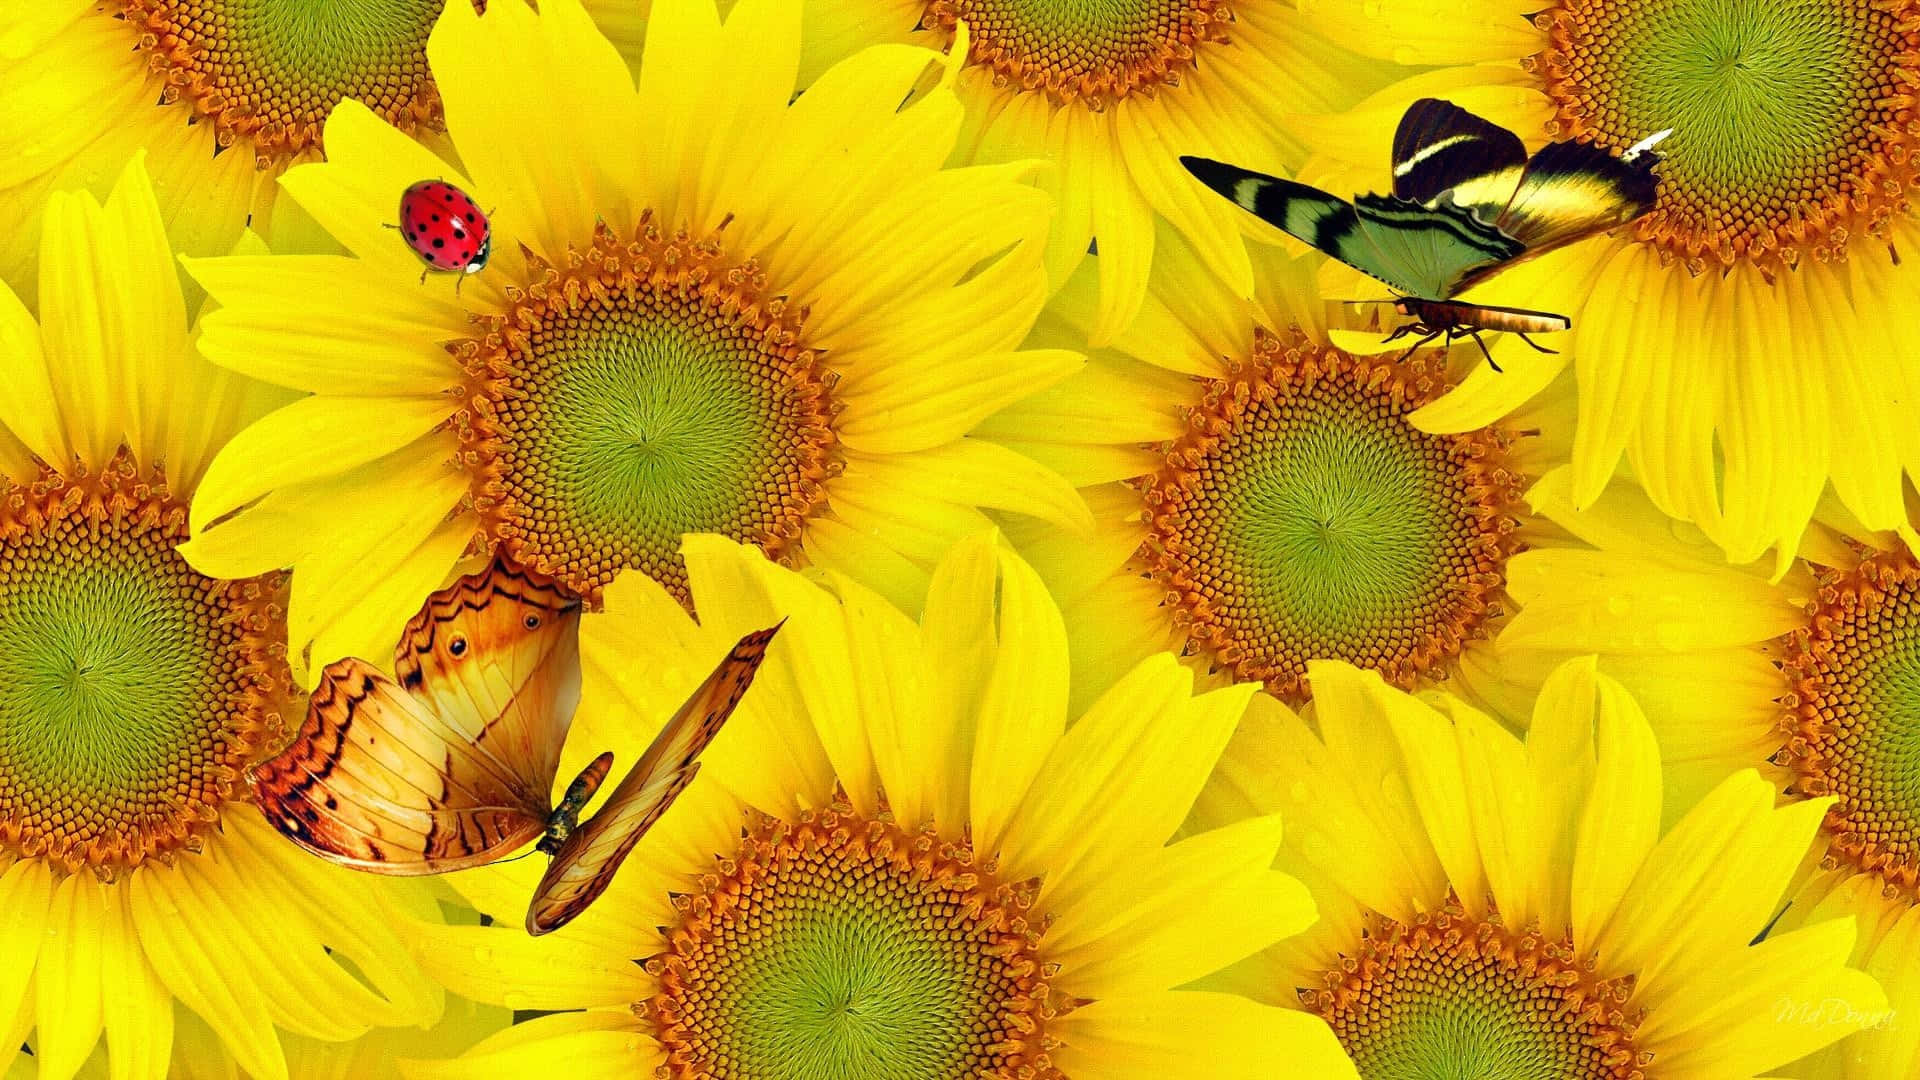 Sunflowers_with_ Butterfly_and_ Ladybug Wallpaper